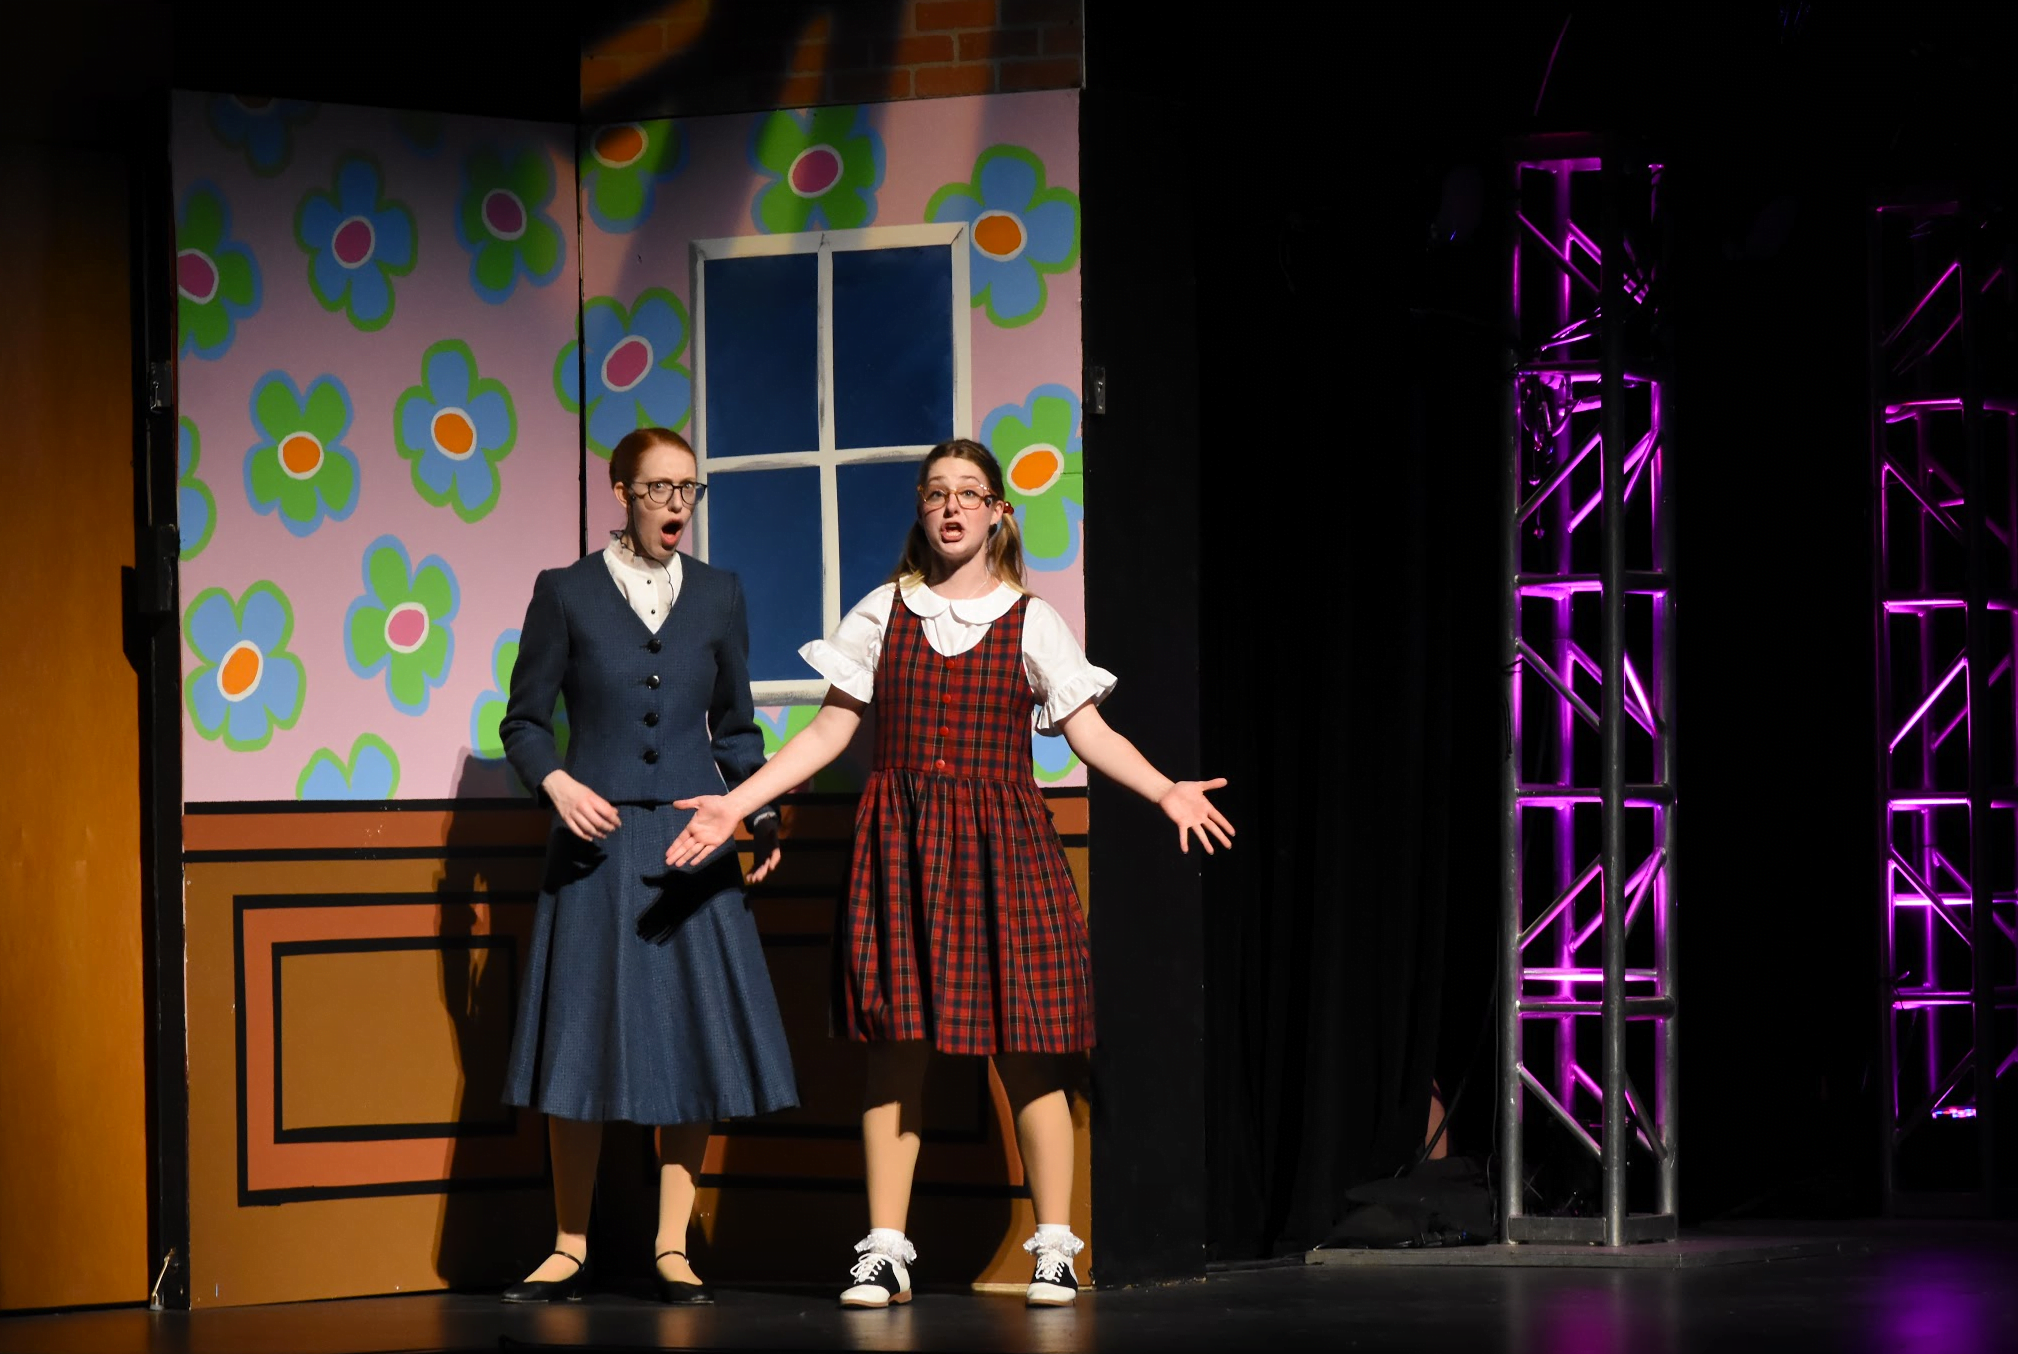 Dress rehearsal for GHS spring musical Hairspray! Photo Patty Doyle